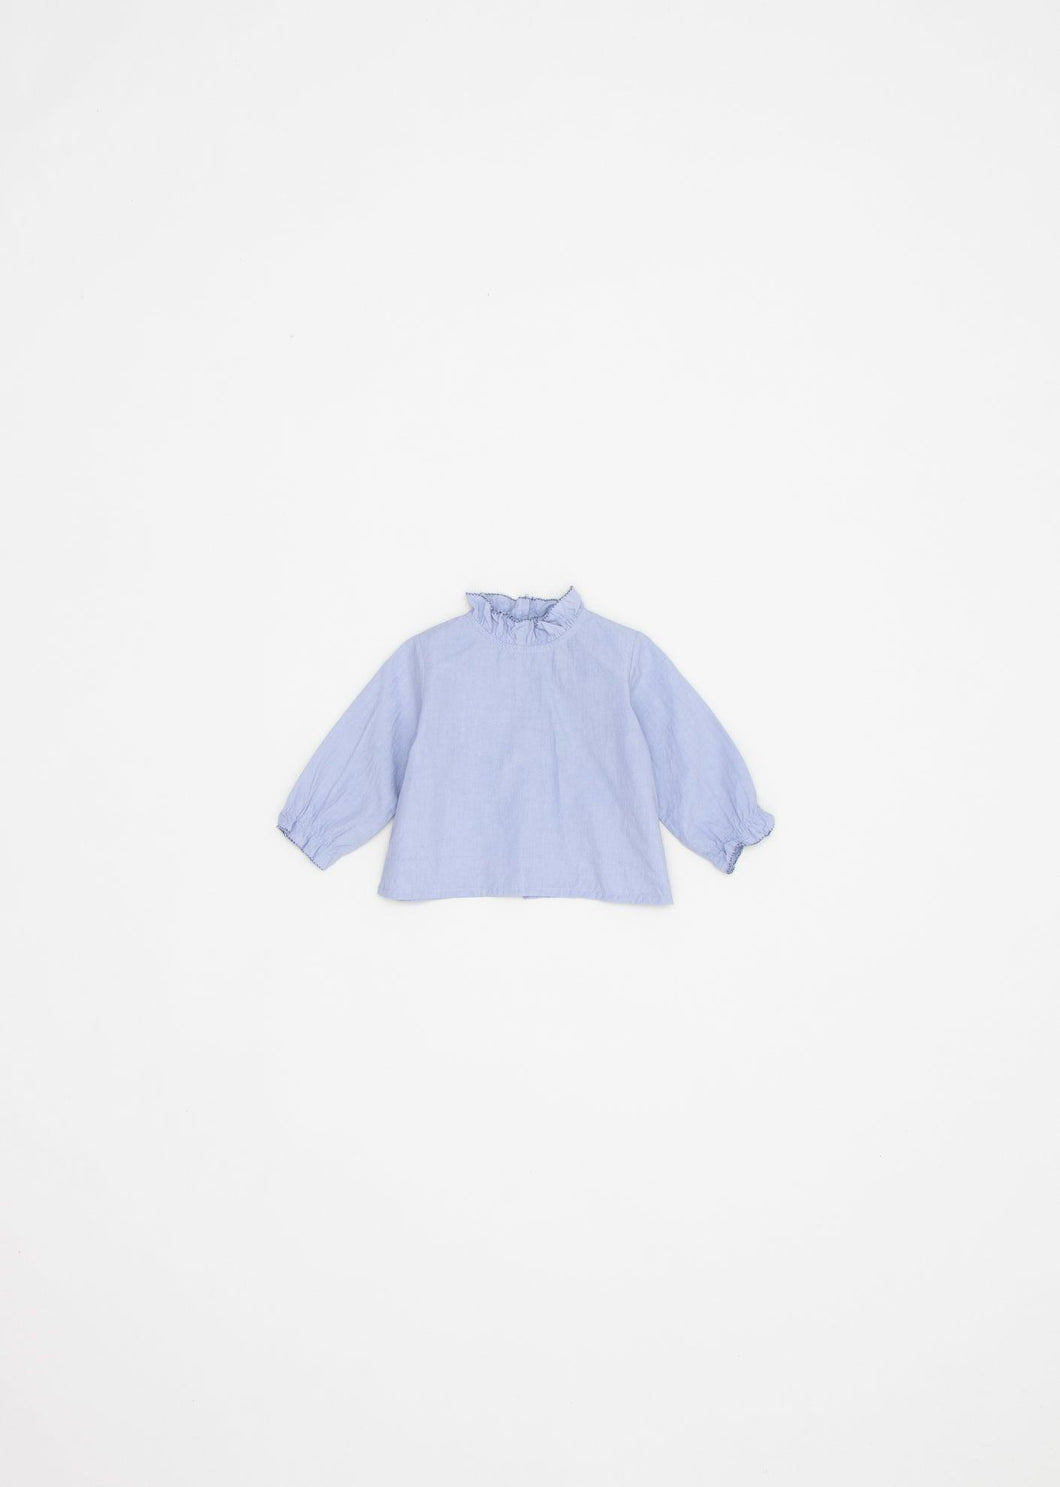 [40%OFF] AMICA BABY BLOUSE-SLATE BLUE - Stellina